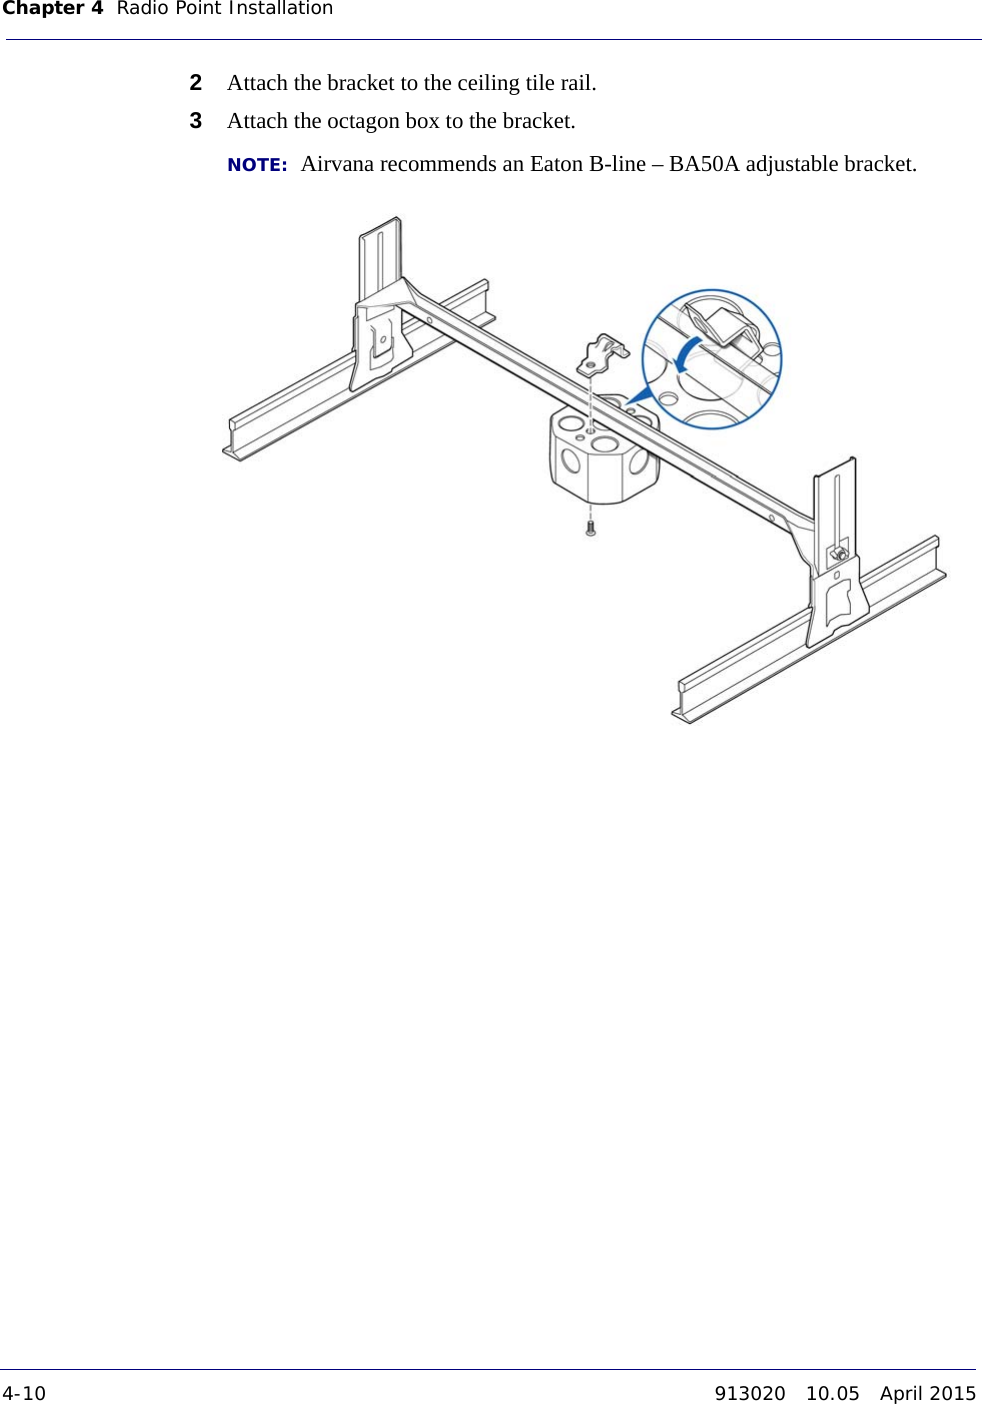 Chapter 4 Radio Point Installation 4-10 913020 10.05 April 2015DRAFT2Attach the bracket to the ceiling tile rail. 3Attach the octagon box to the bracket. NOTE:  Airvana recommends an Eaton B-line – BA50A adjustable bracket. 